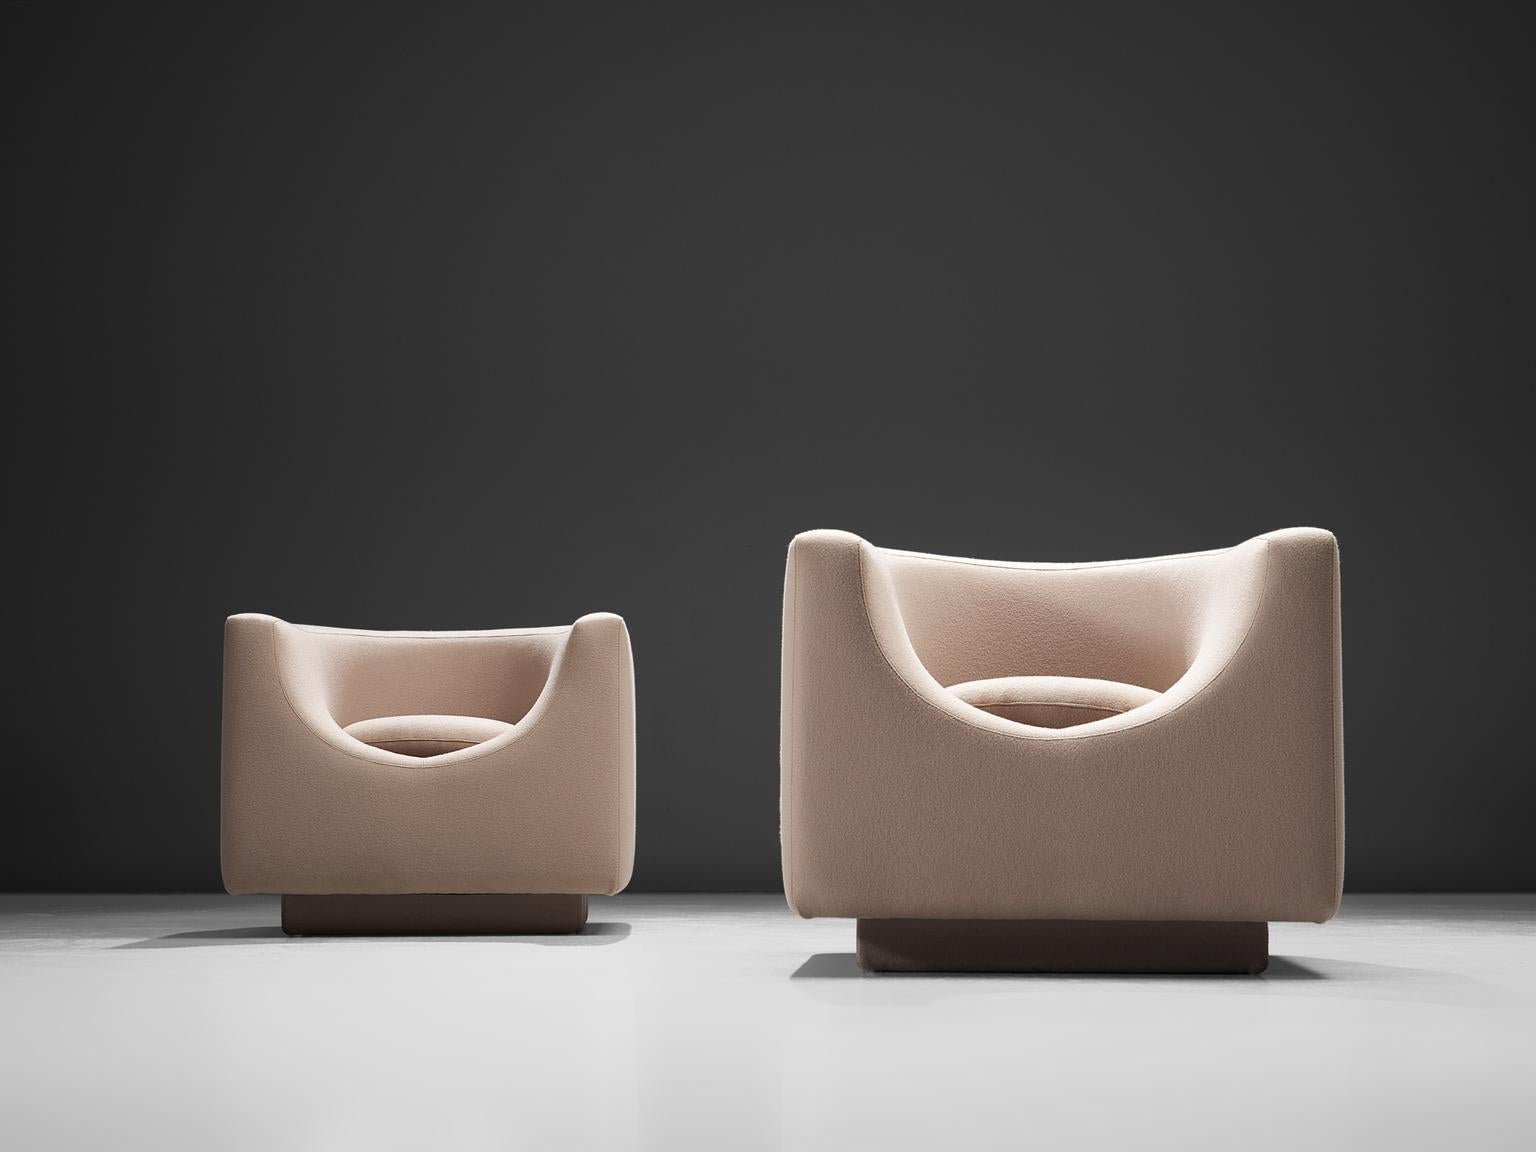 Saporiti, pair of lounge chairs, fabric, Italy, 1970s.

These incredibly comfortable cubic chairs of Saporiti are from Italy, 1970s. This design, which is both functional and sculptural it a wonderful example of Italian postwar design. They were